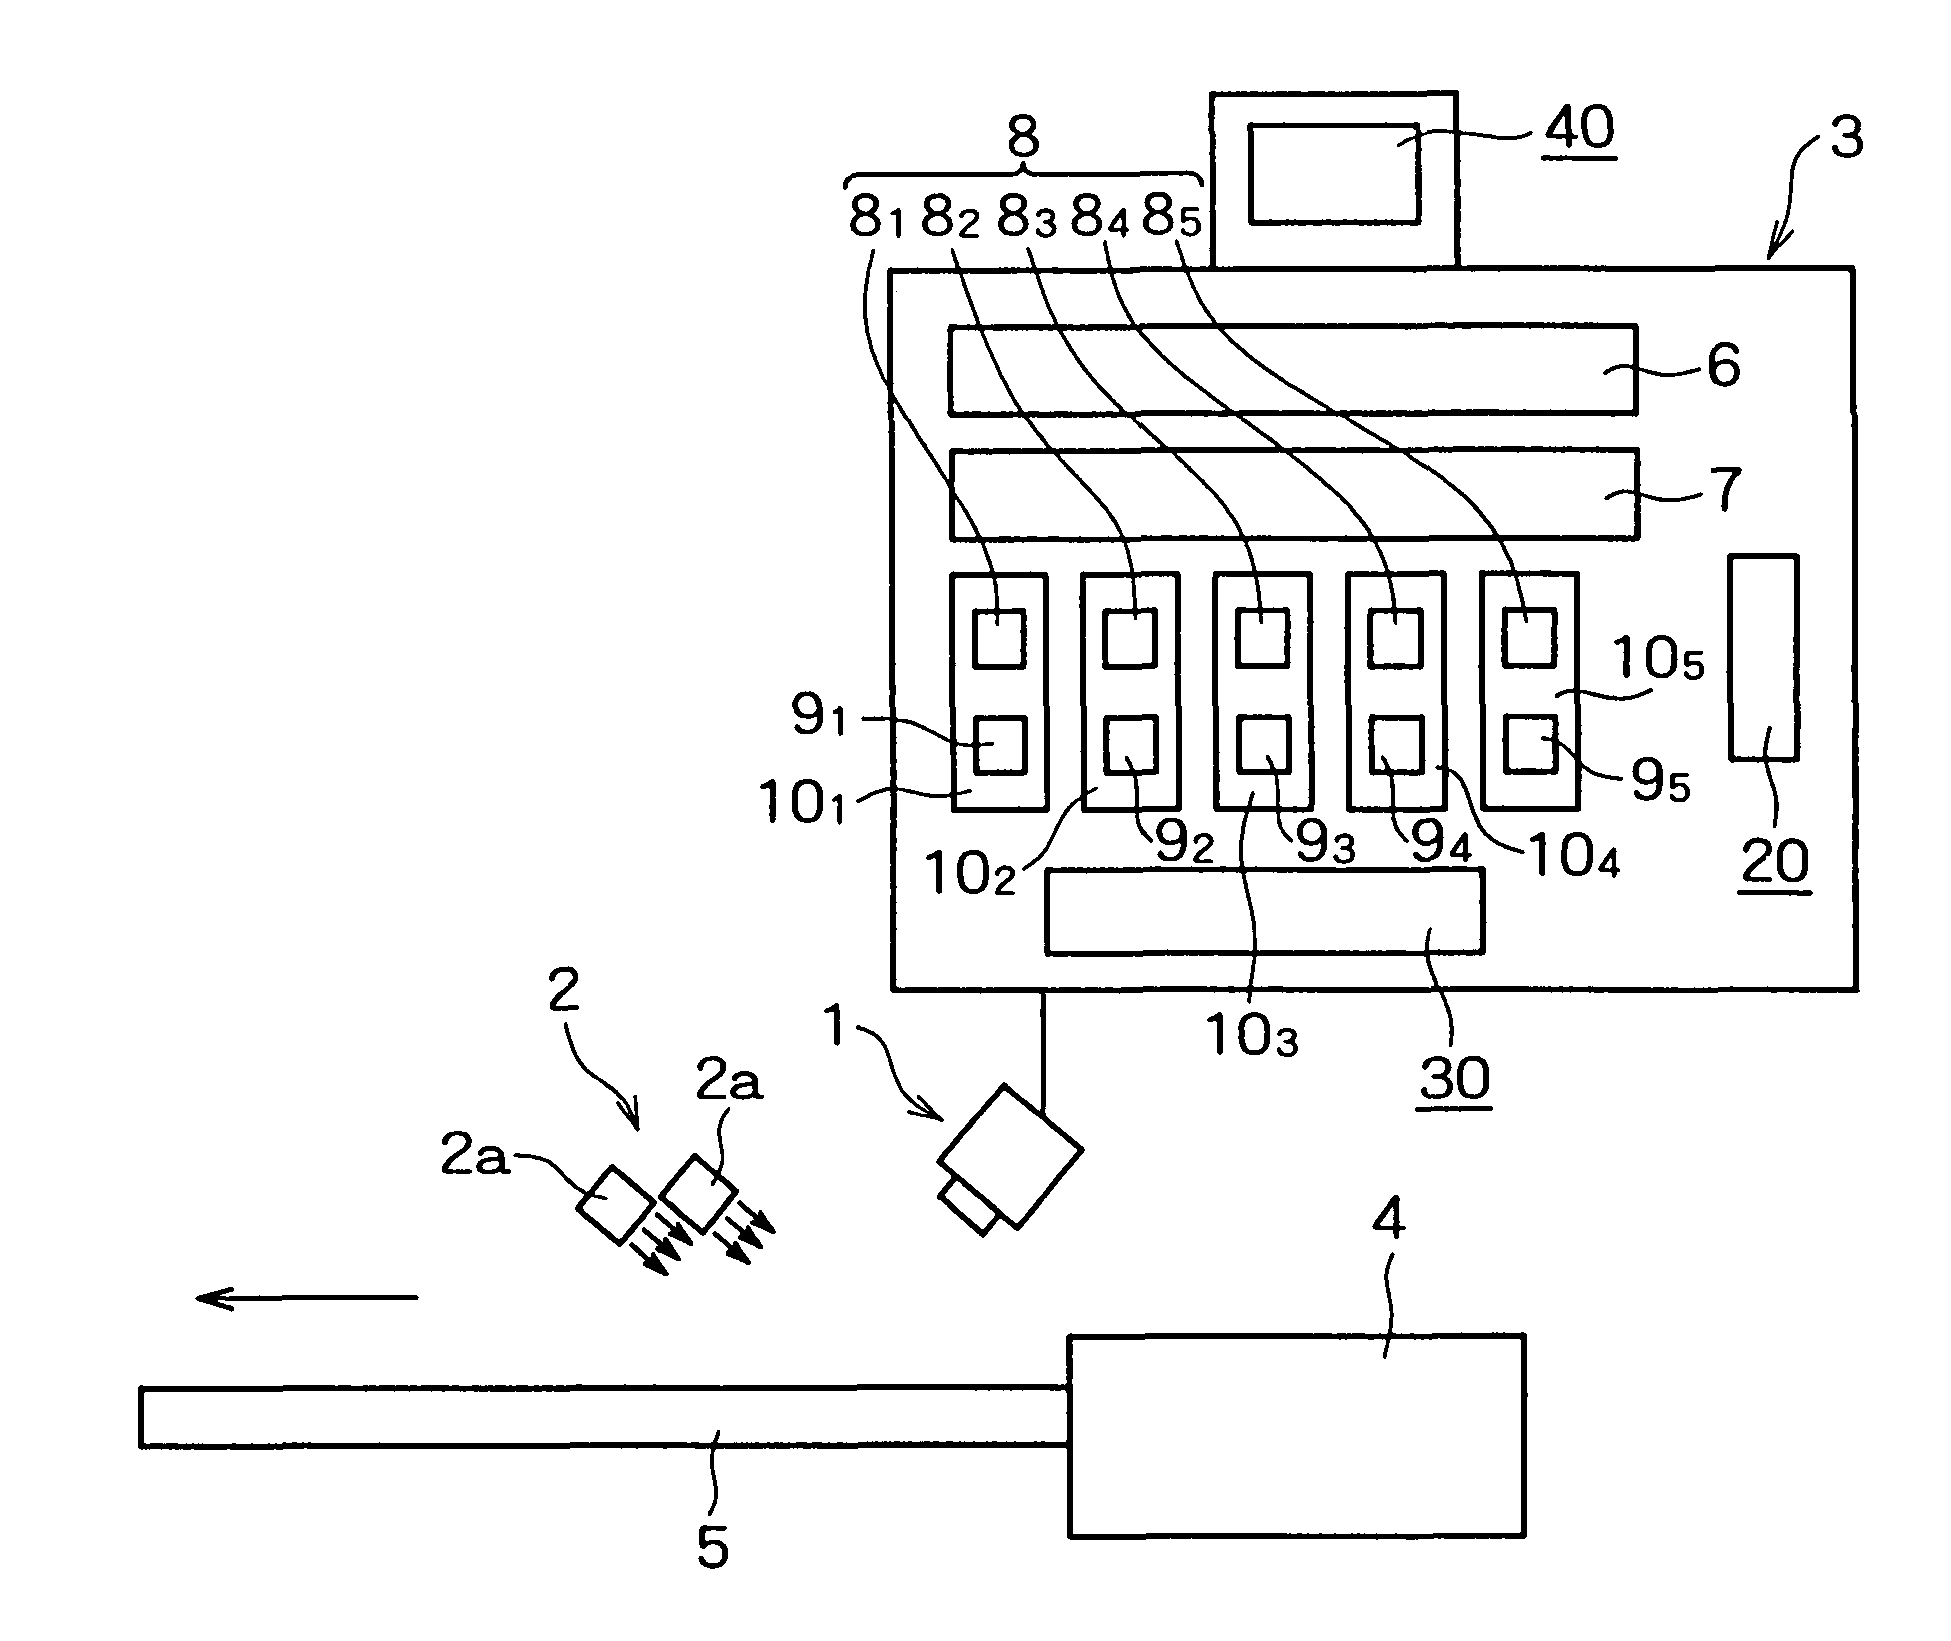 Article visual inspection apparatus